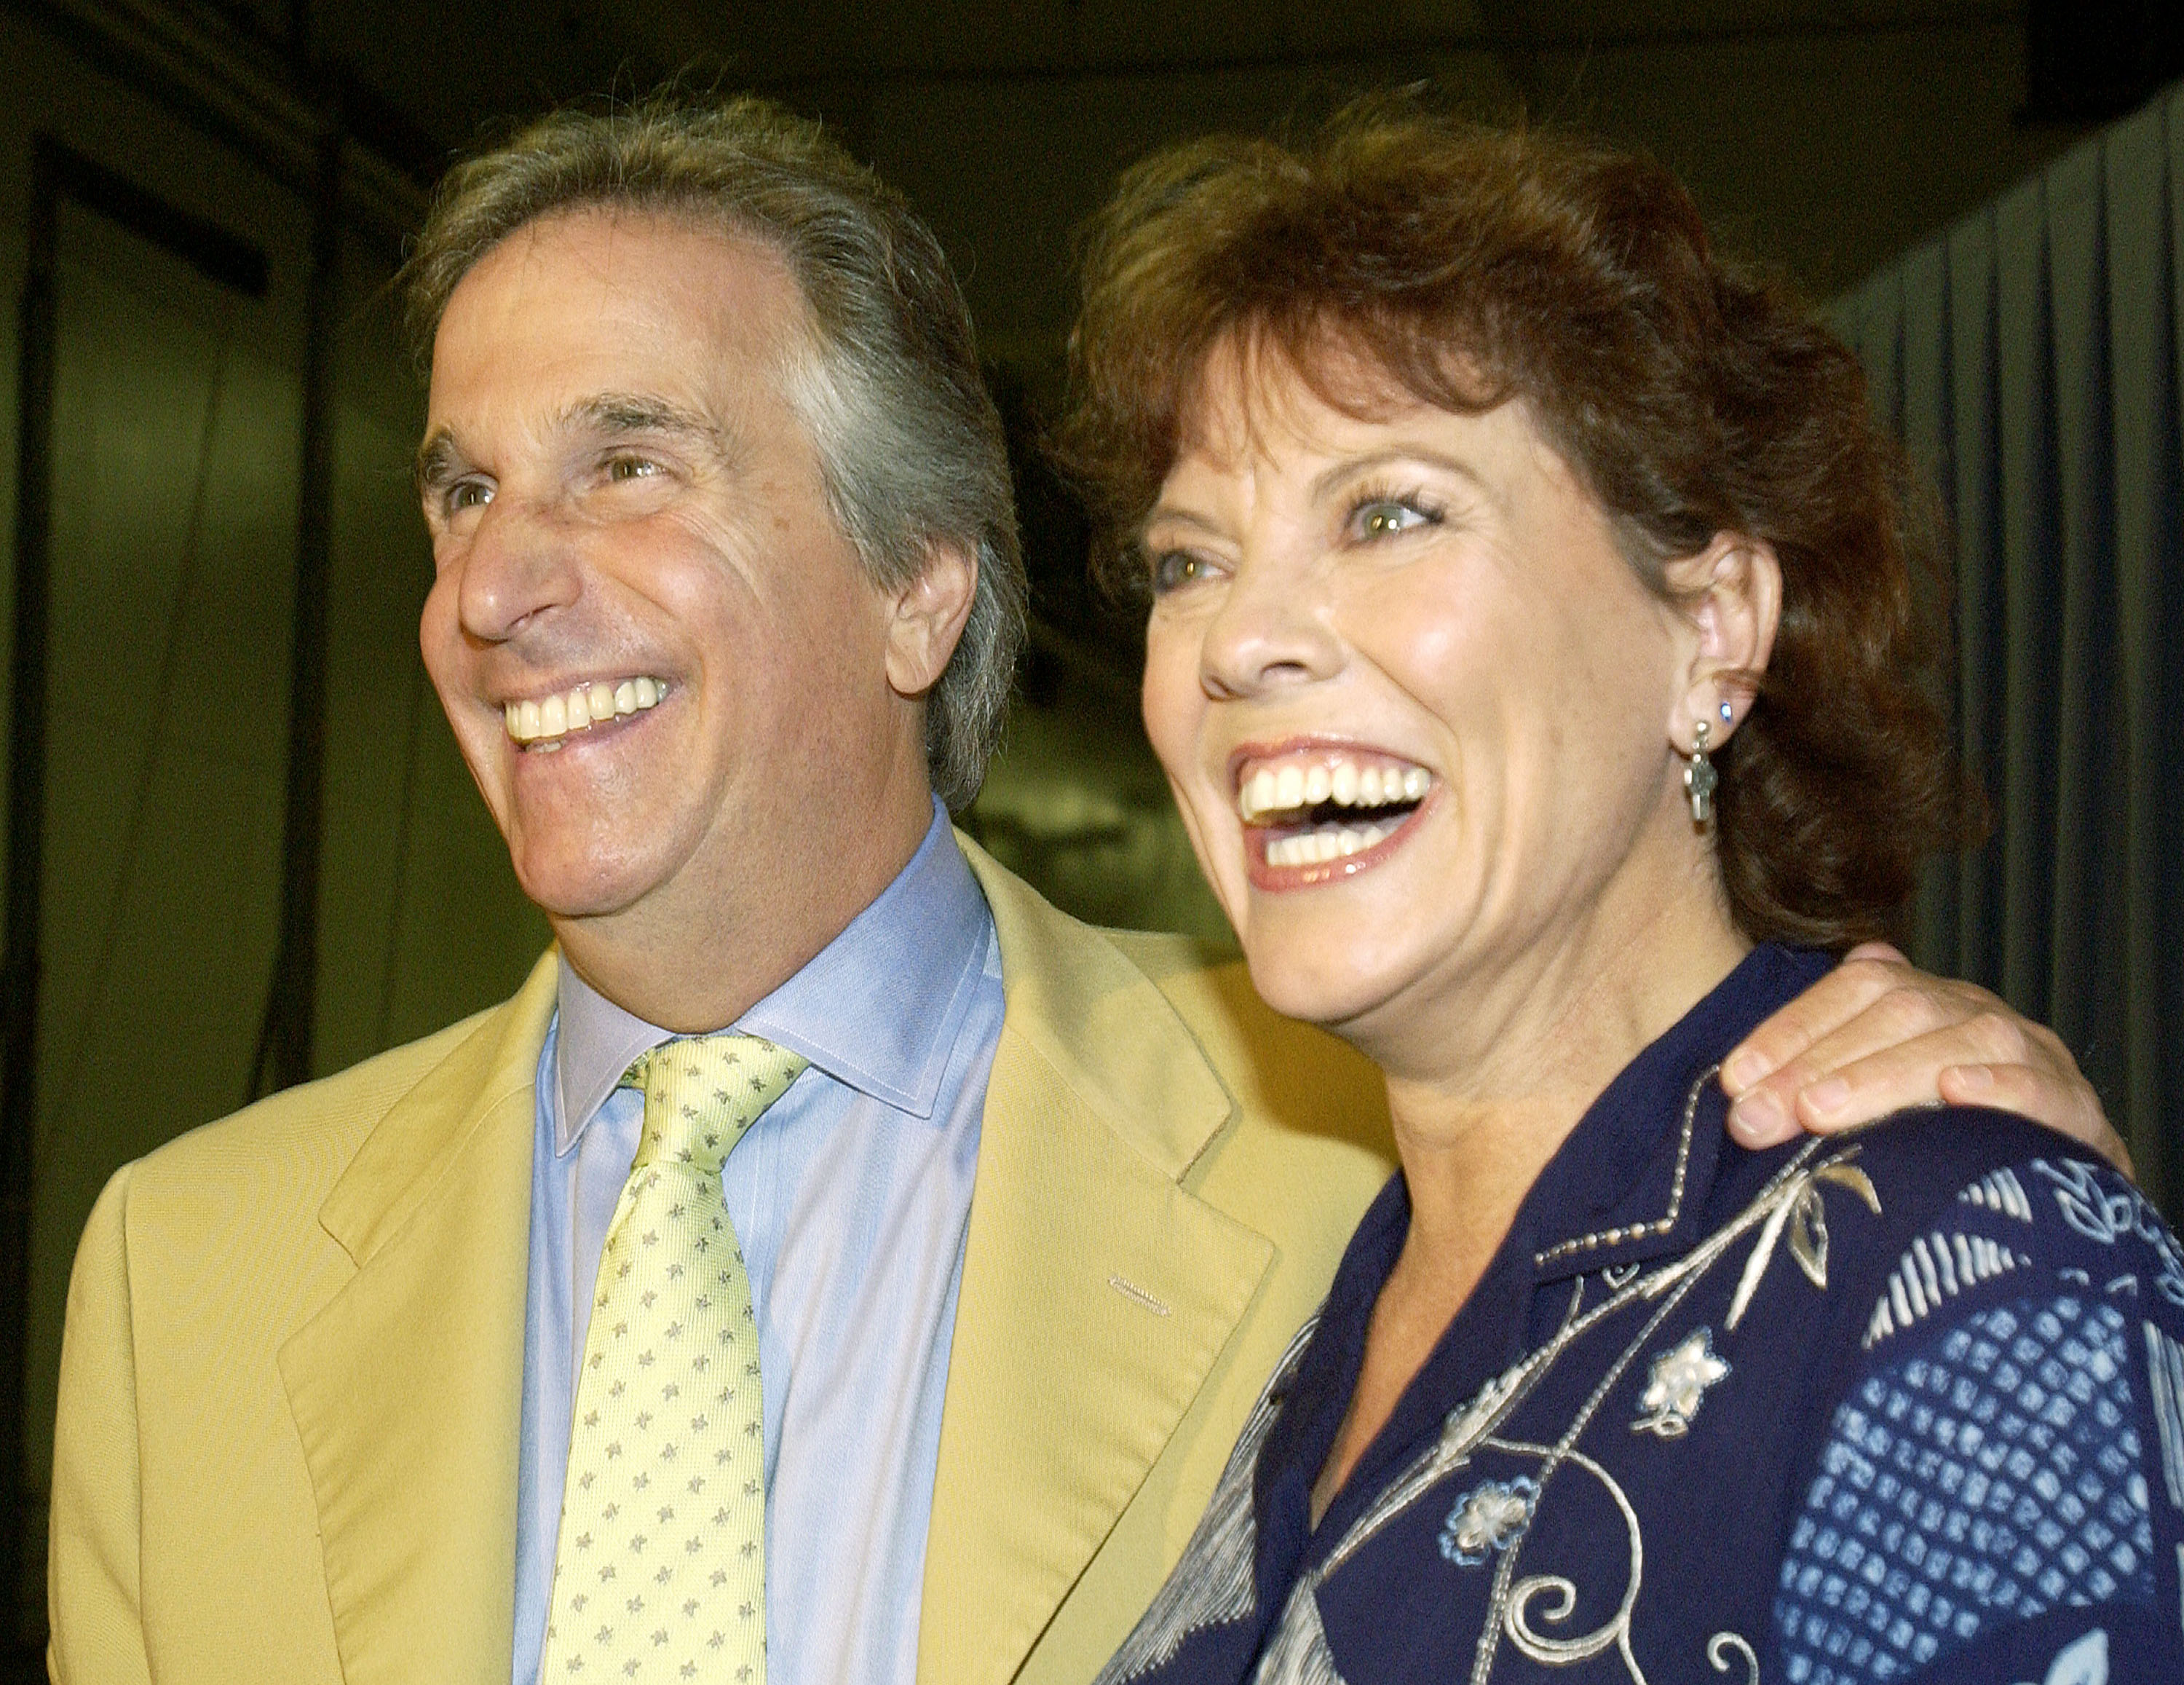 Henry Winkler and Erin Moran at CBS Television City in Los Angeles, California | Source: Getty Images